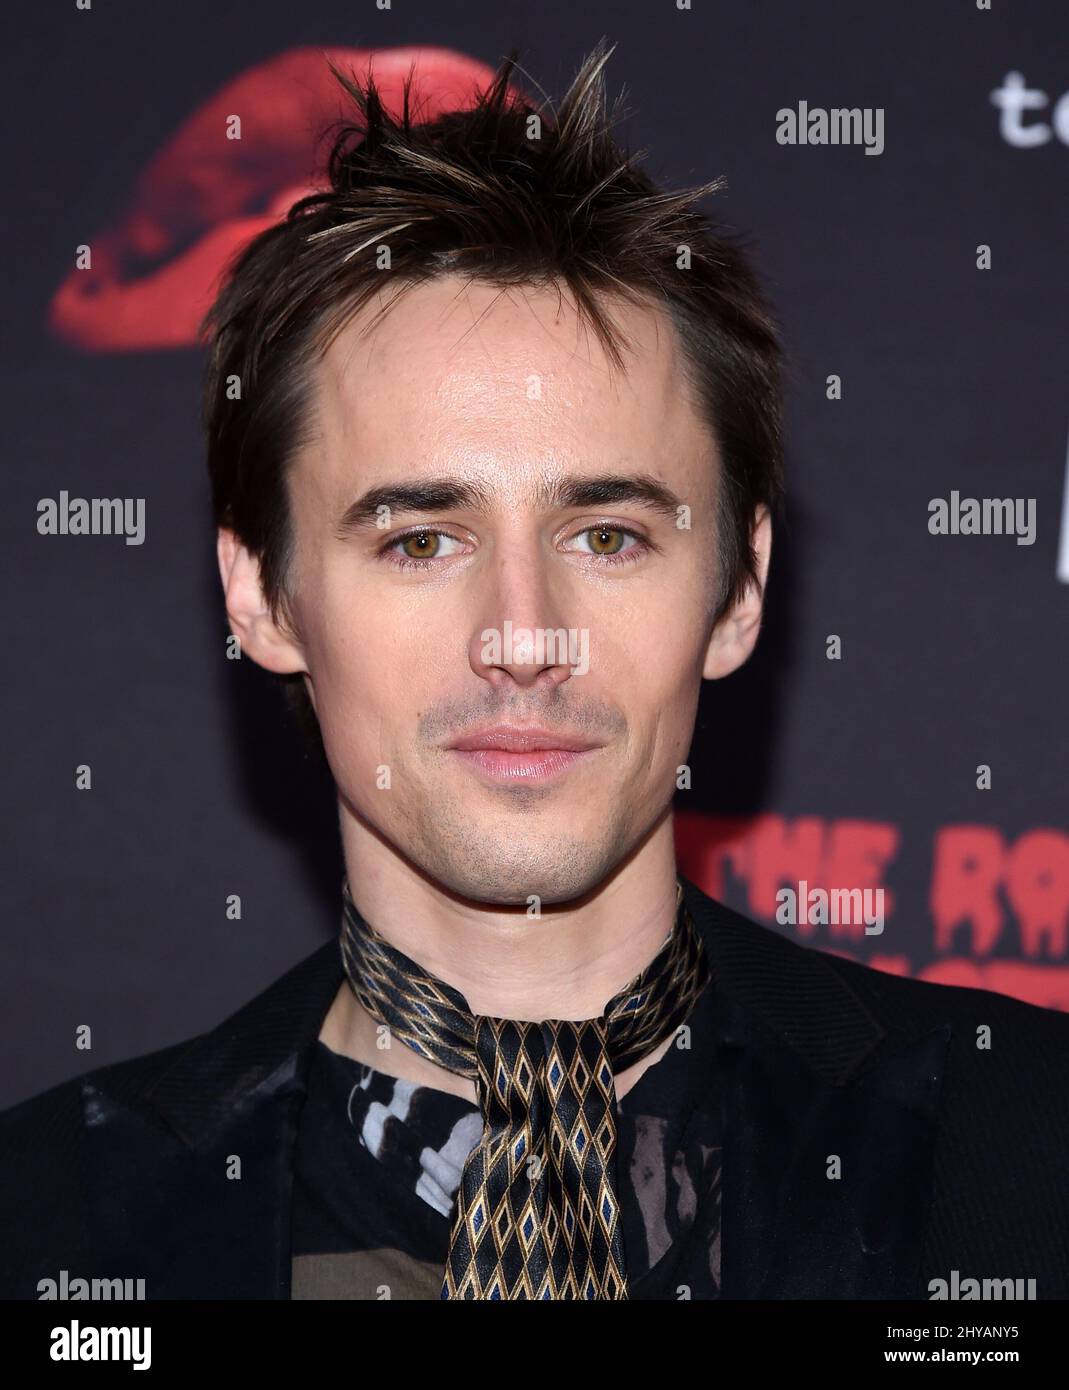 Reeve Carney attending the Rocky Horror Picture Show: Let's Do The Time Warp Again Premiere held at The Roxy, in Los Angeles, California. Stock Photo